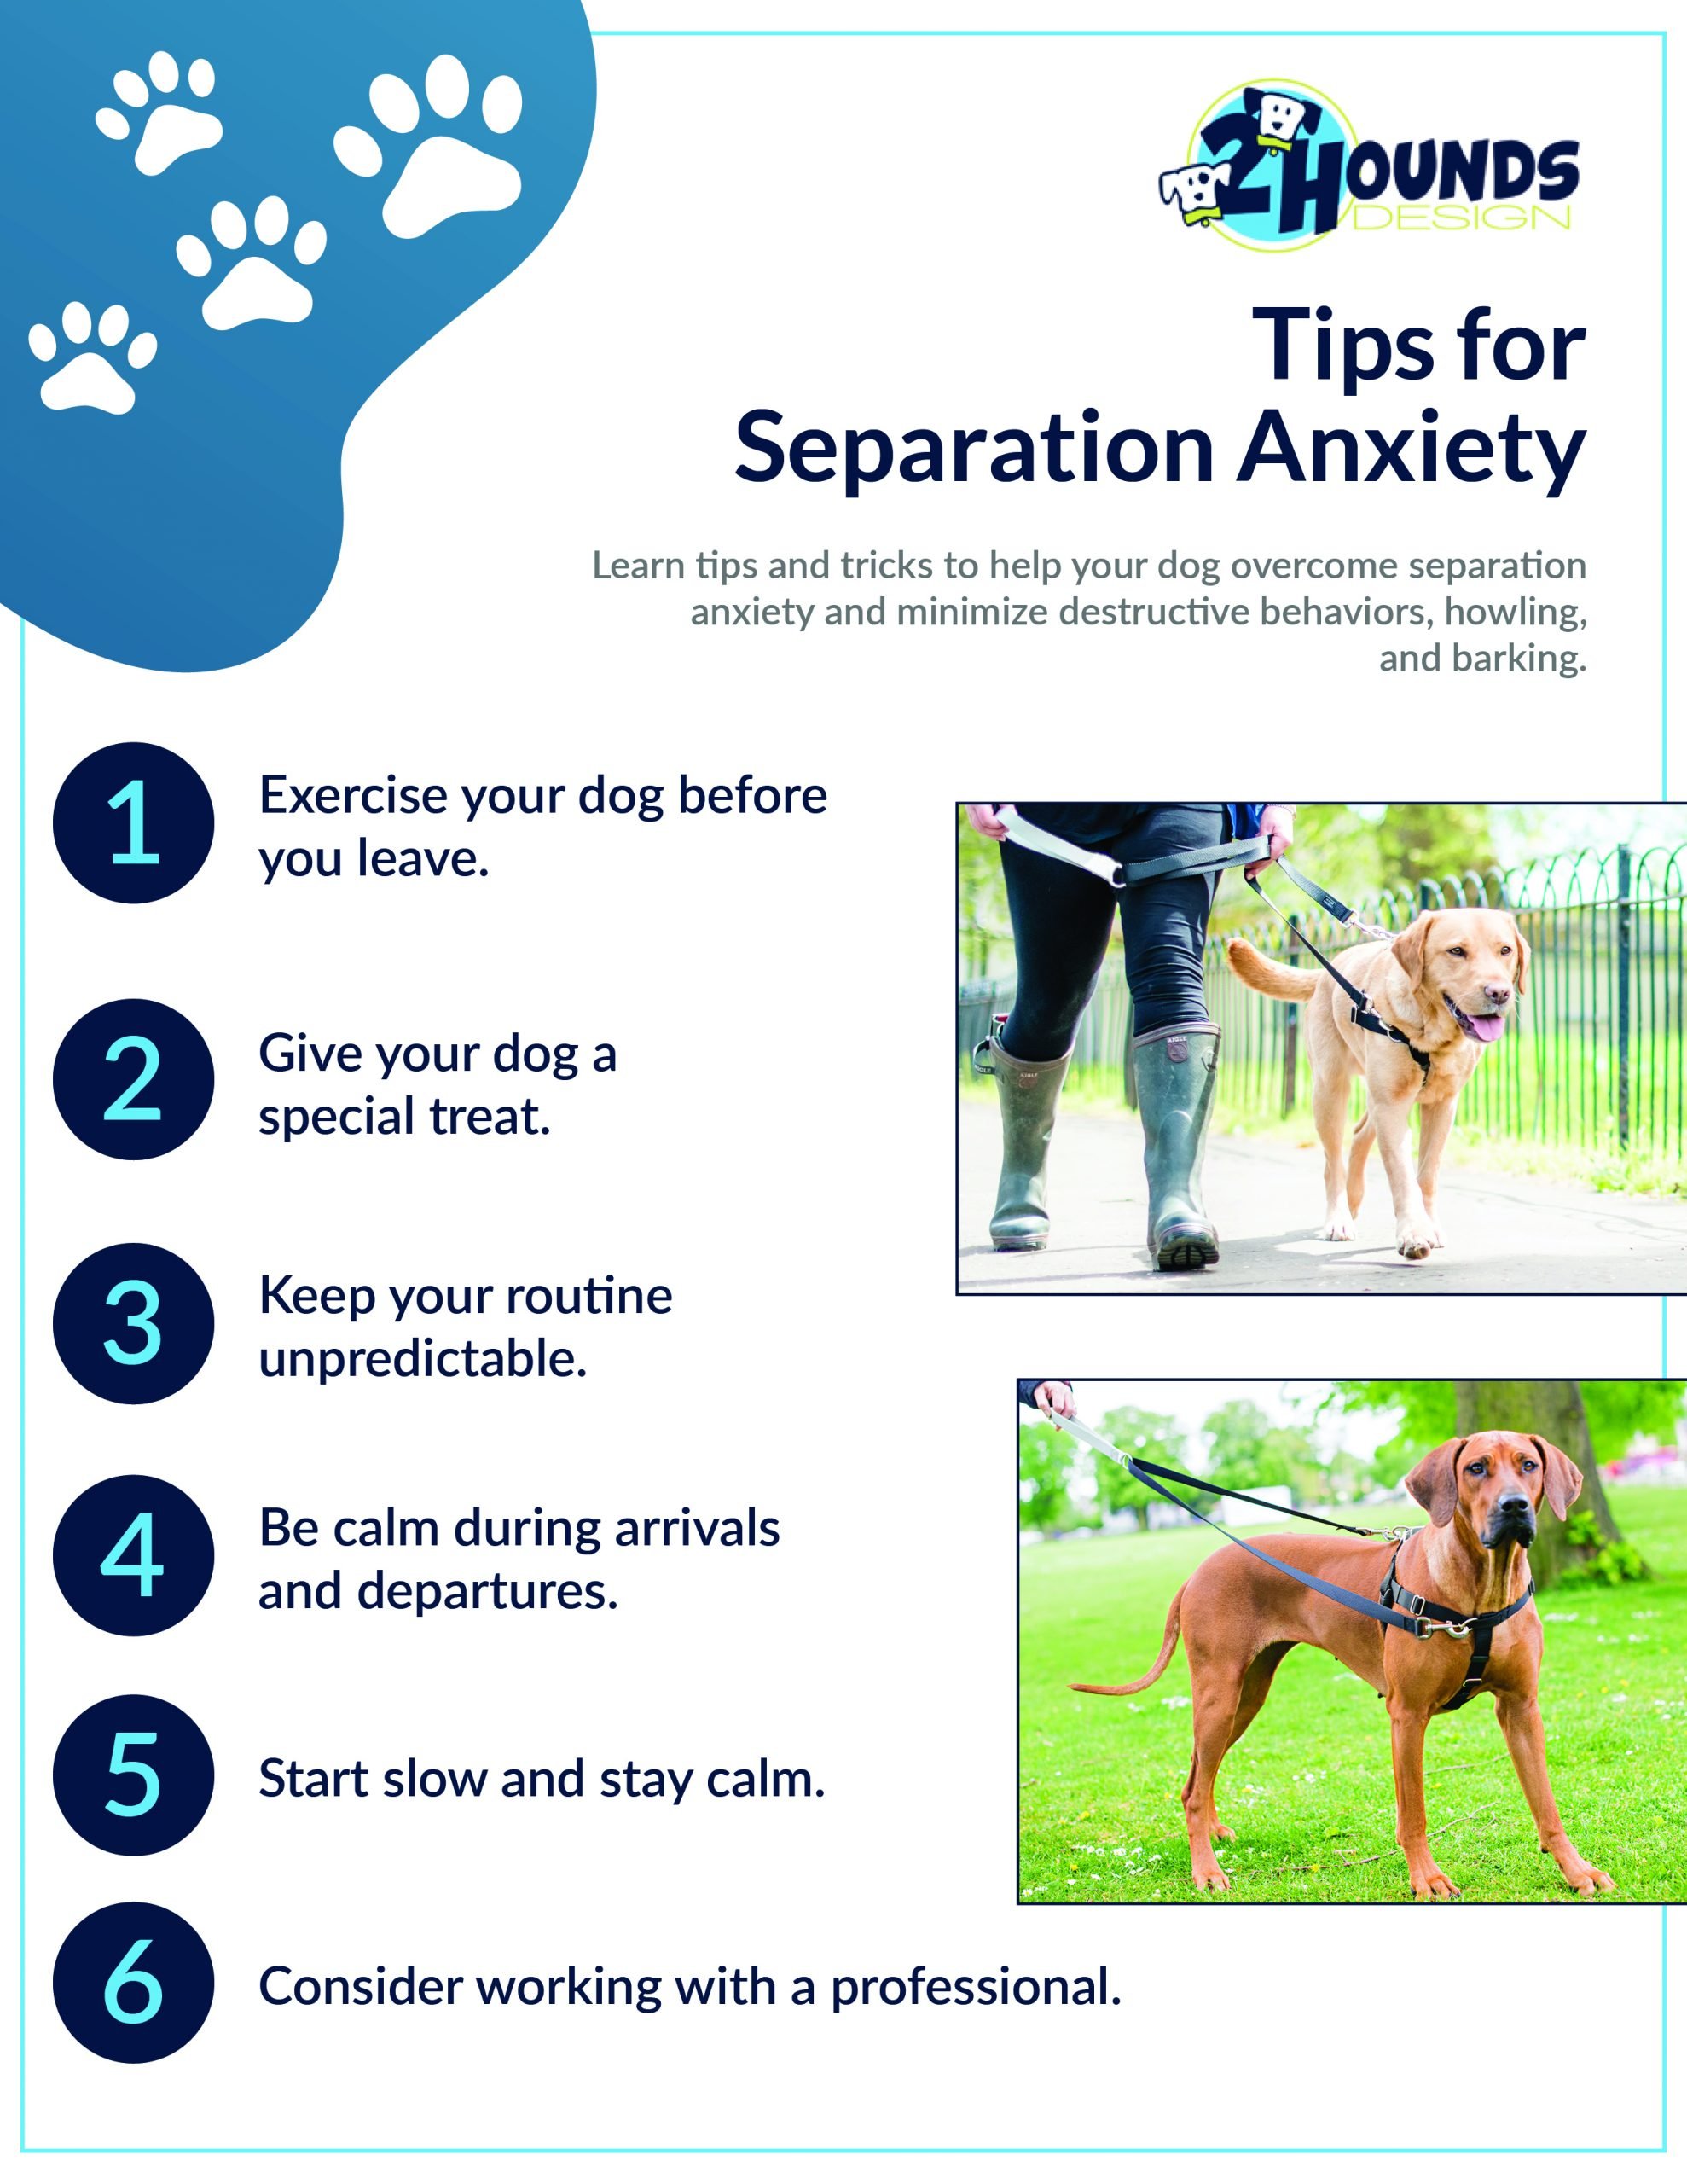 How to Help your Dog with Separation Anxiety